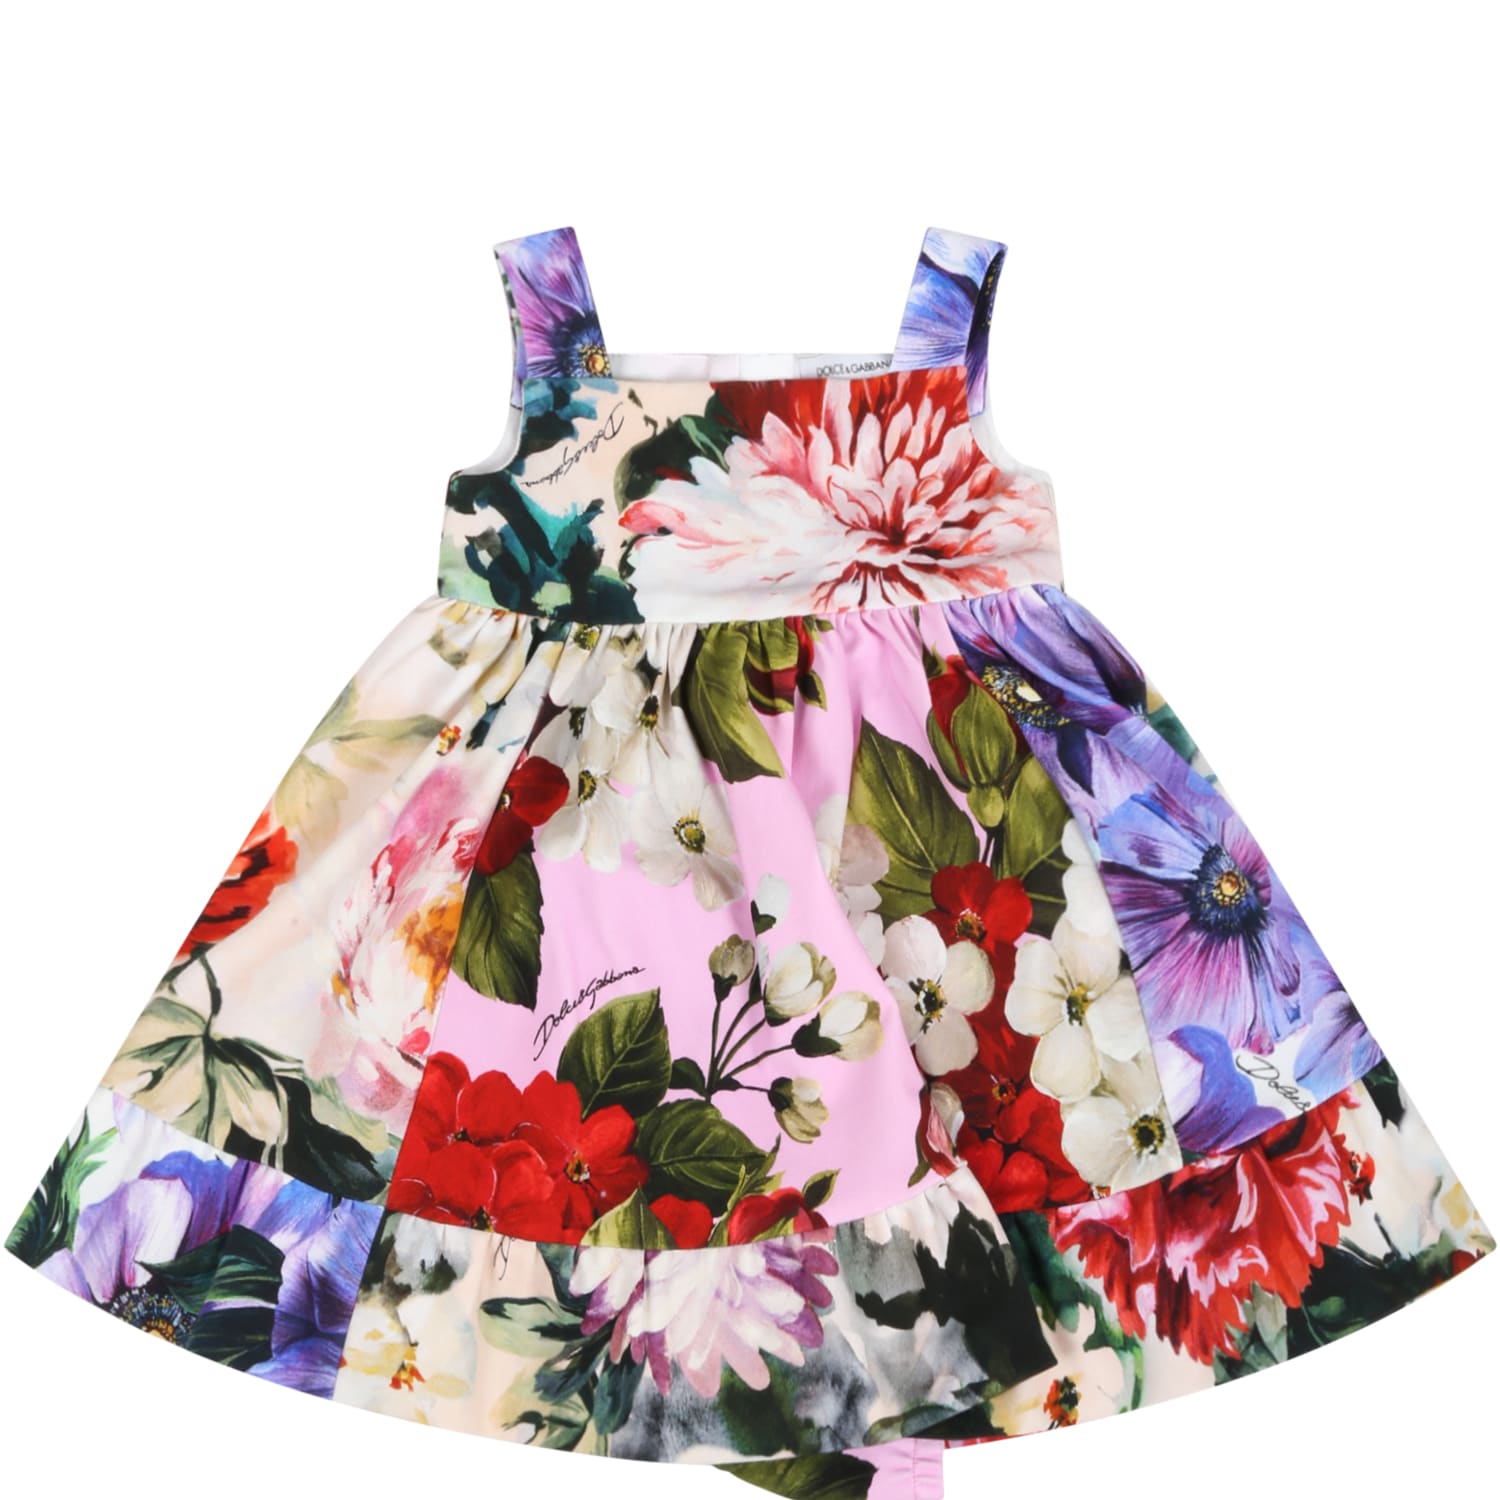 Dolce & Gabbana Multicolor Dress For Babygirl With Flowers